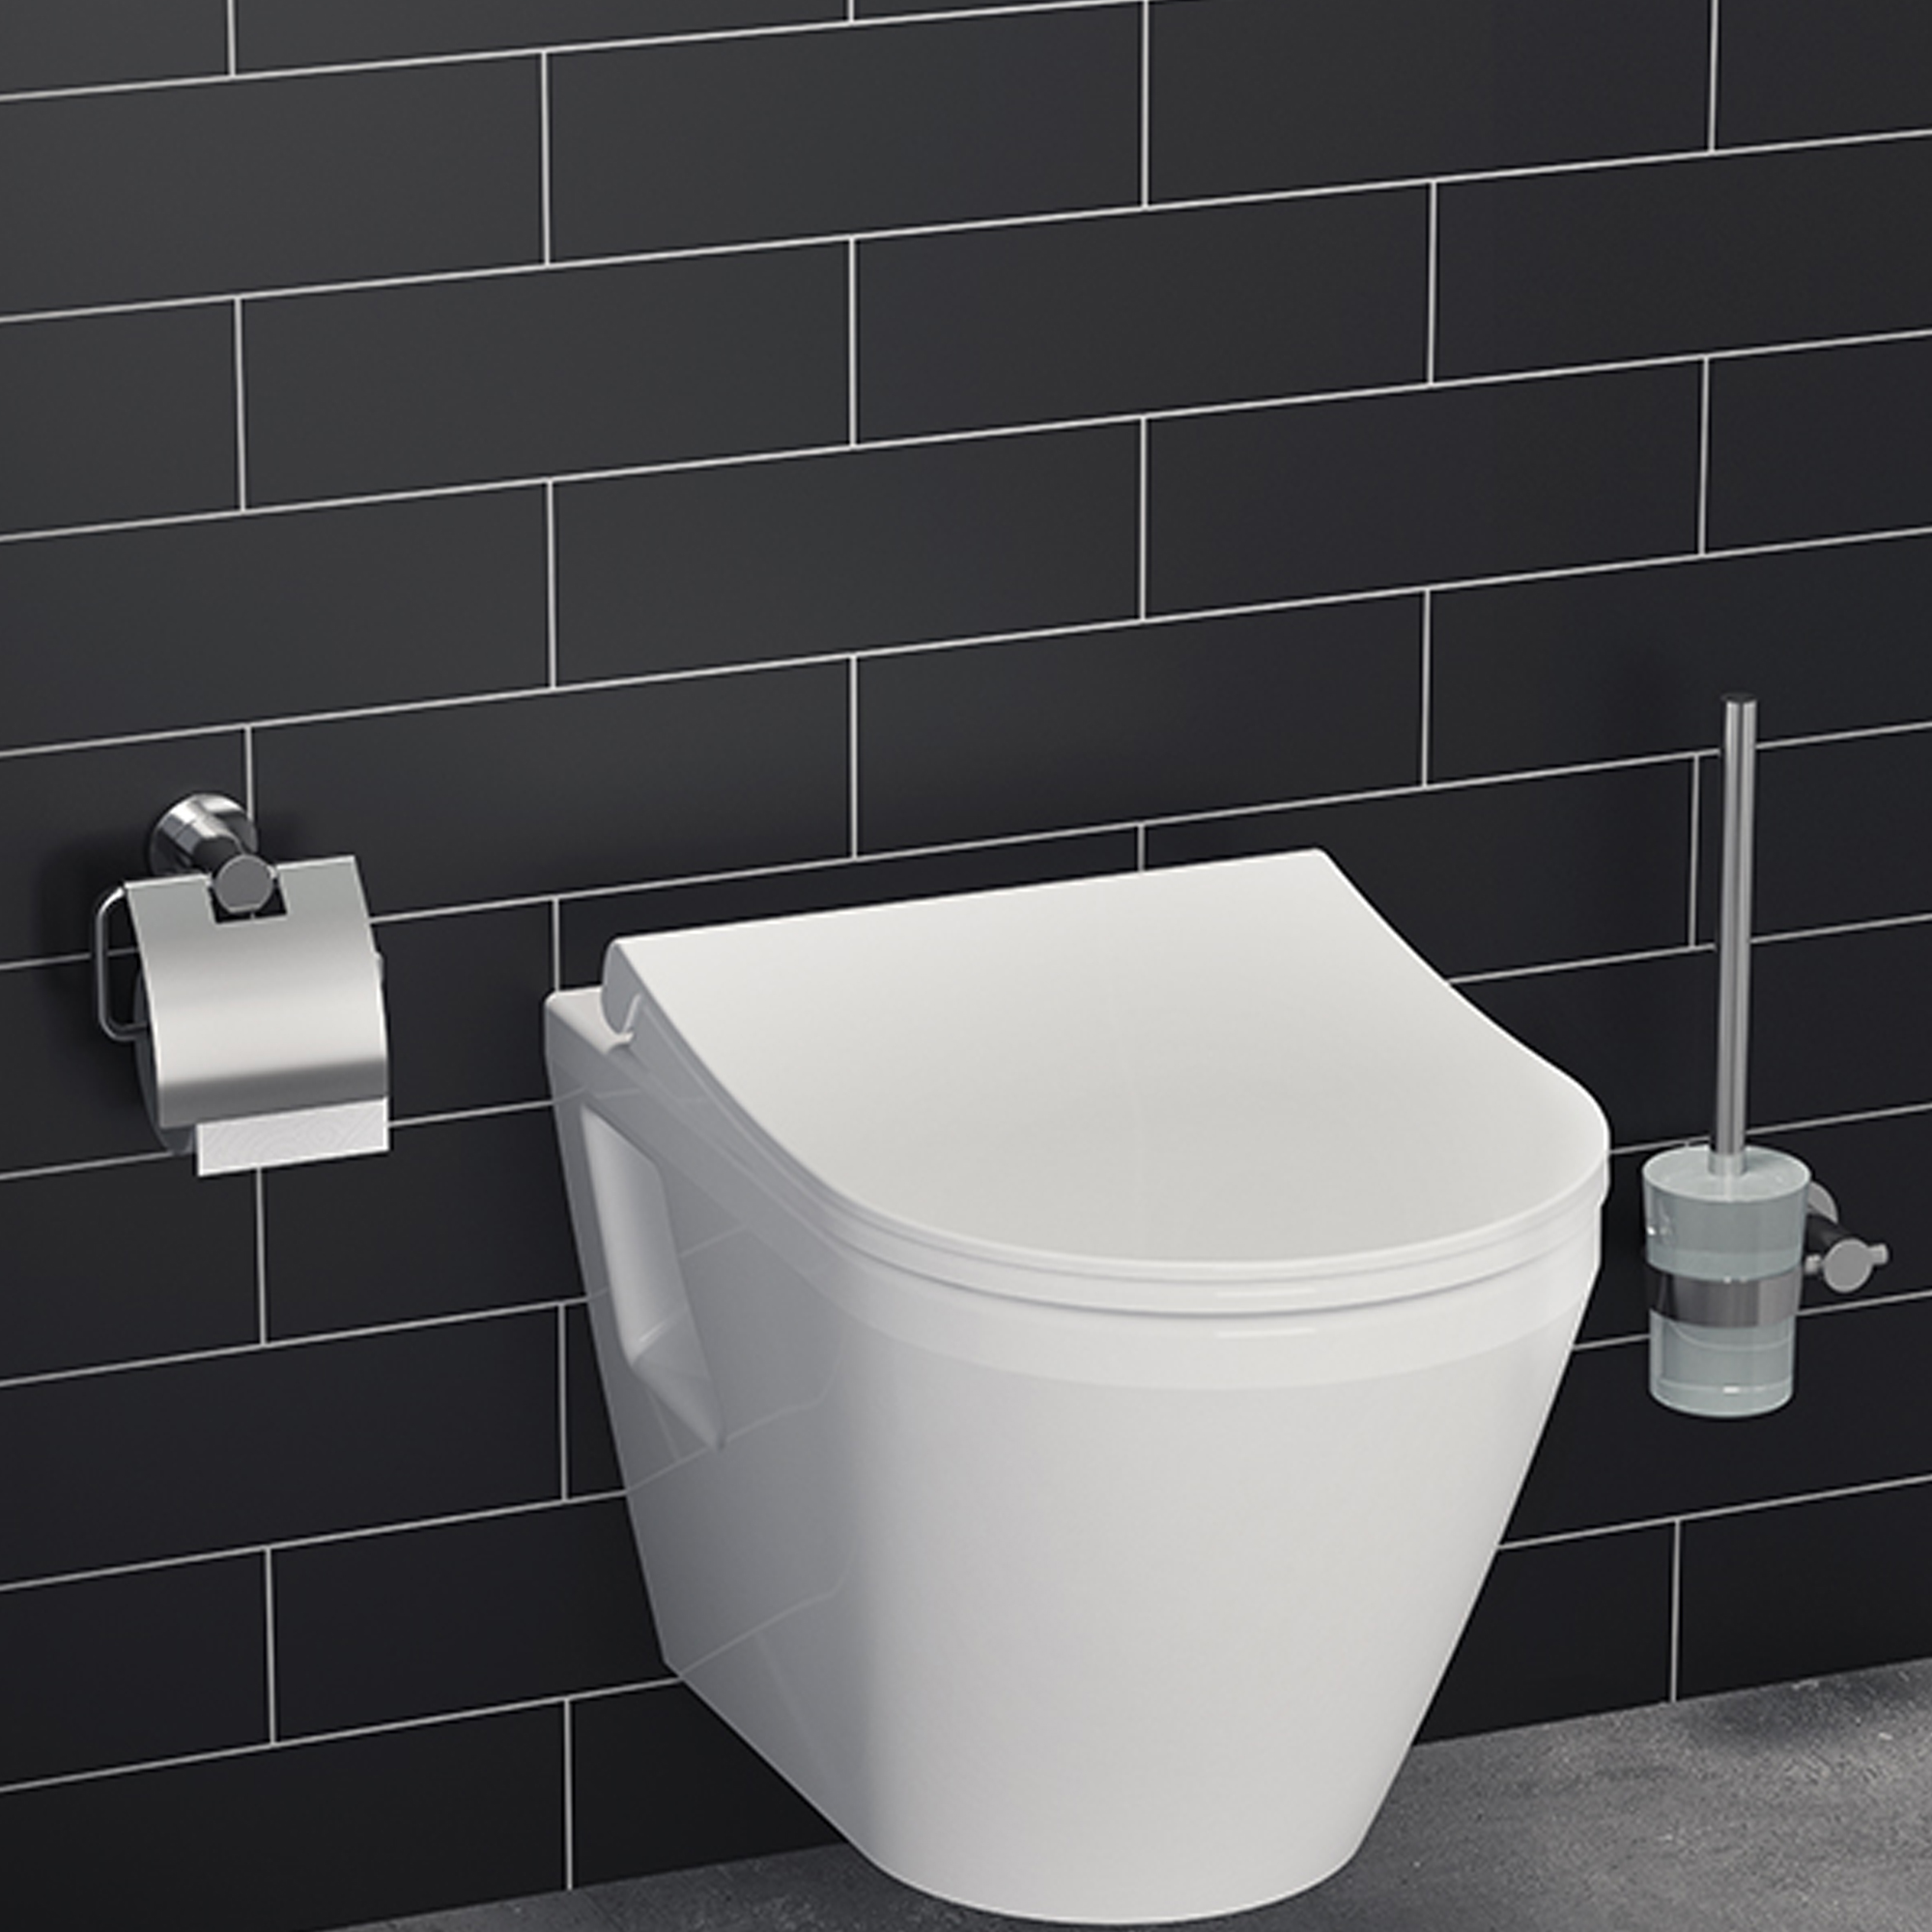 k und abnehmbar data-mtsrclang=en-US href=# onclick=return false; 							show original title Details about   Toilet Seat to fit Vitra Integra S80 with automatic closing and removable 